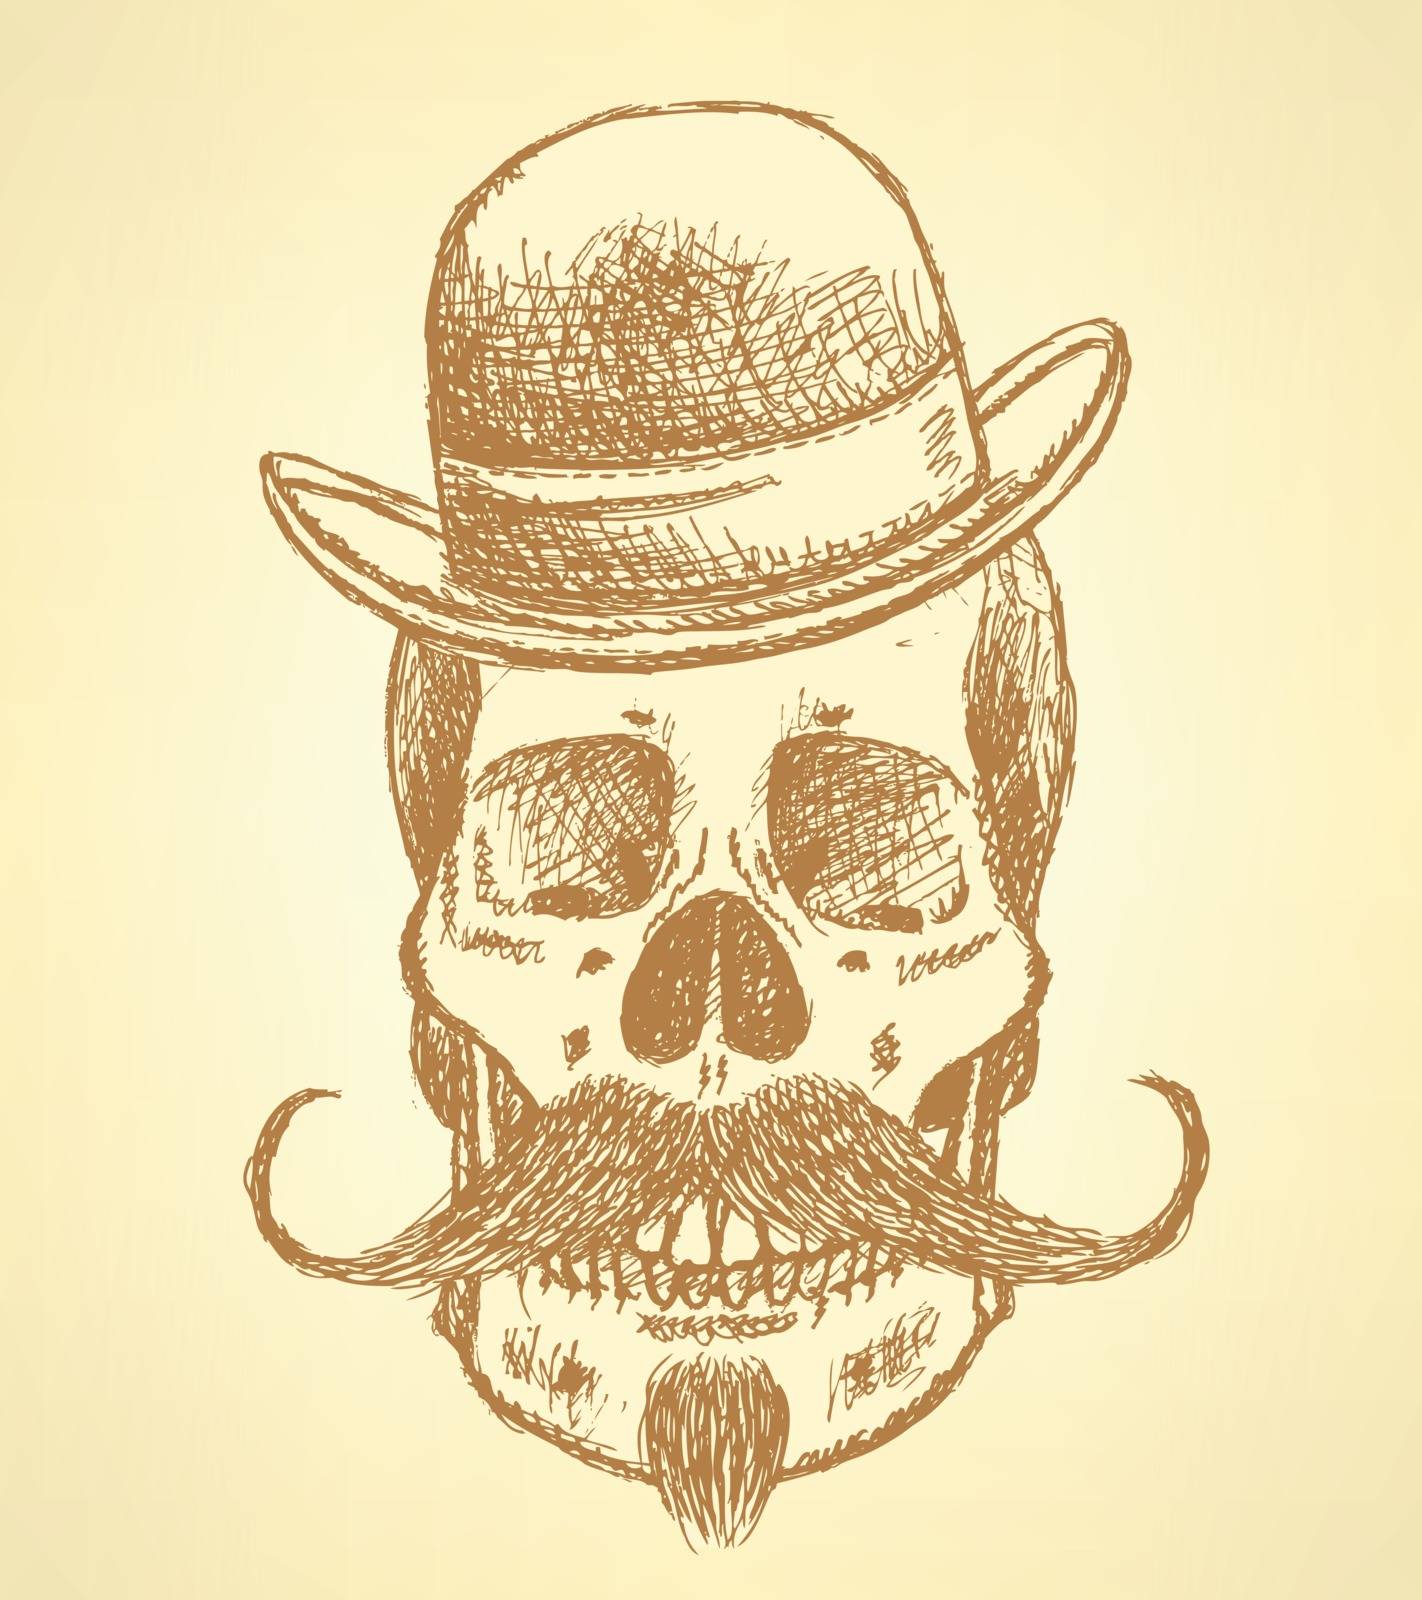 Sketch scull with mustache and in hat by KaLi